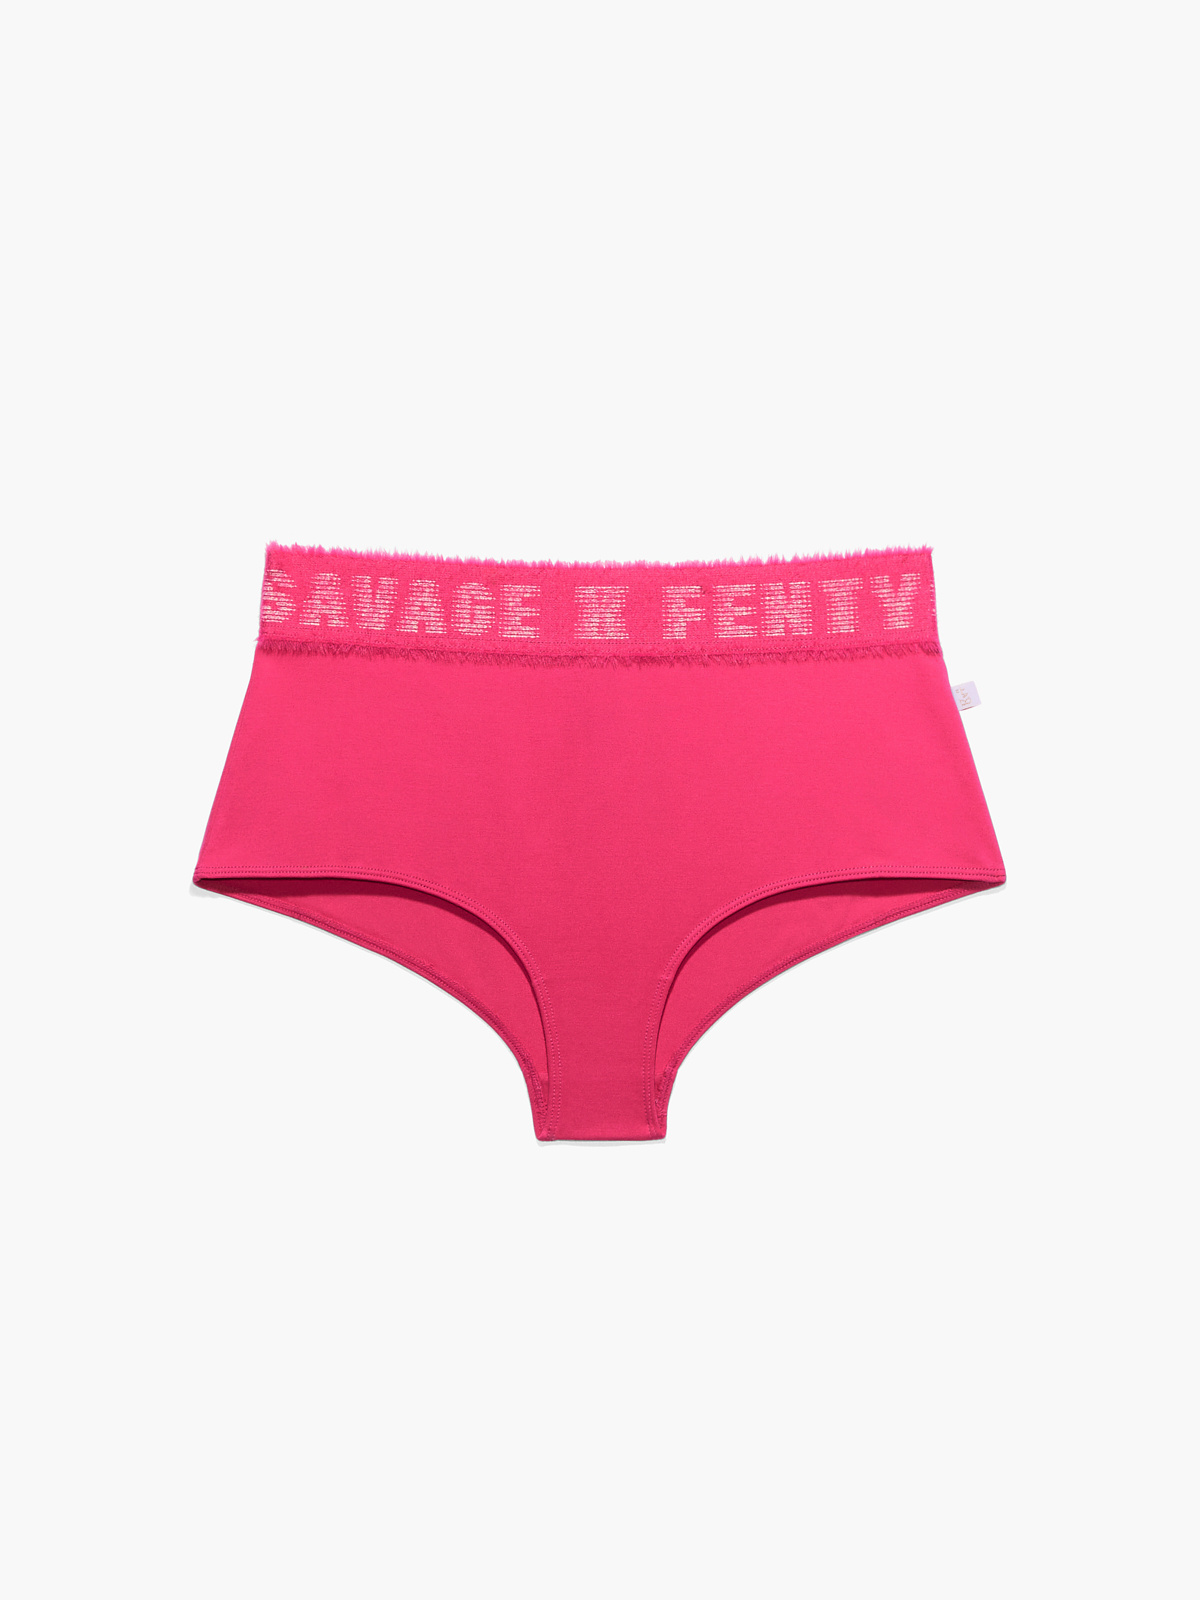 CLF Forever Savage Cheeky Booty Short in Pink